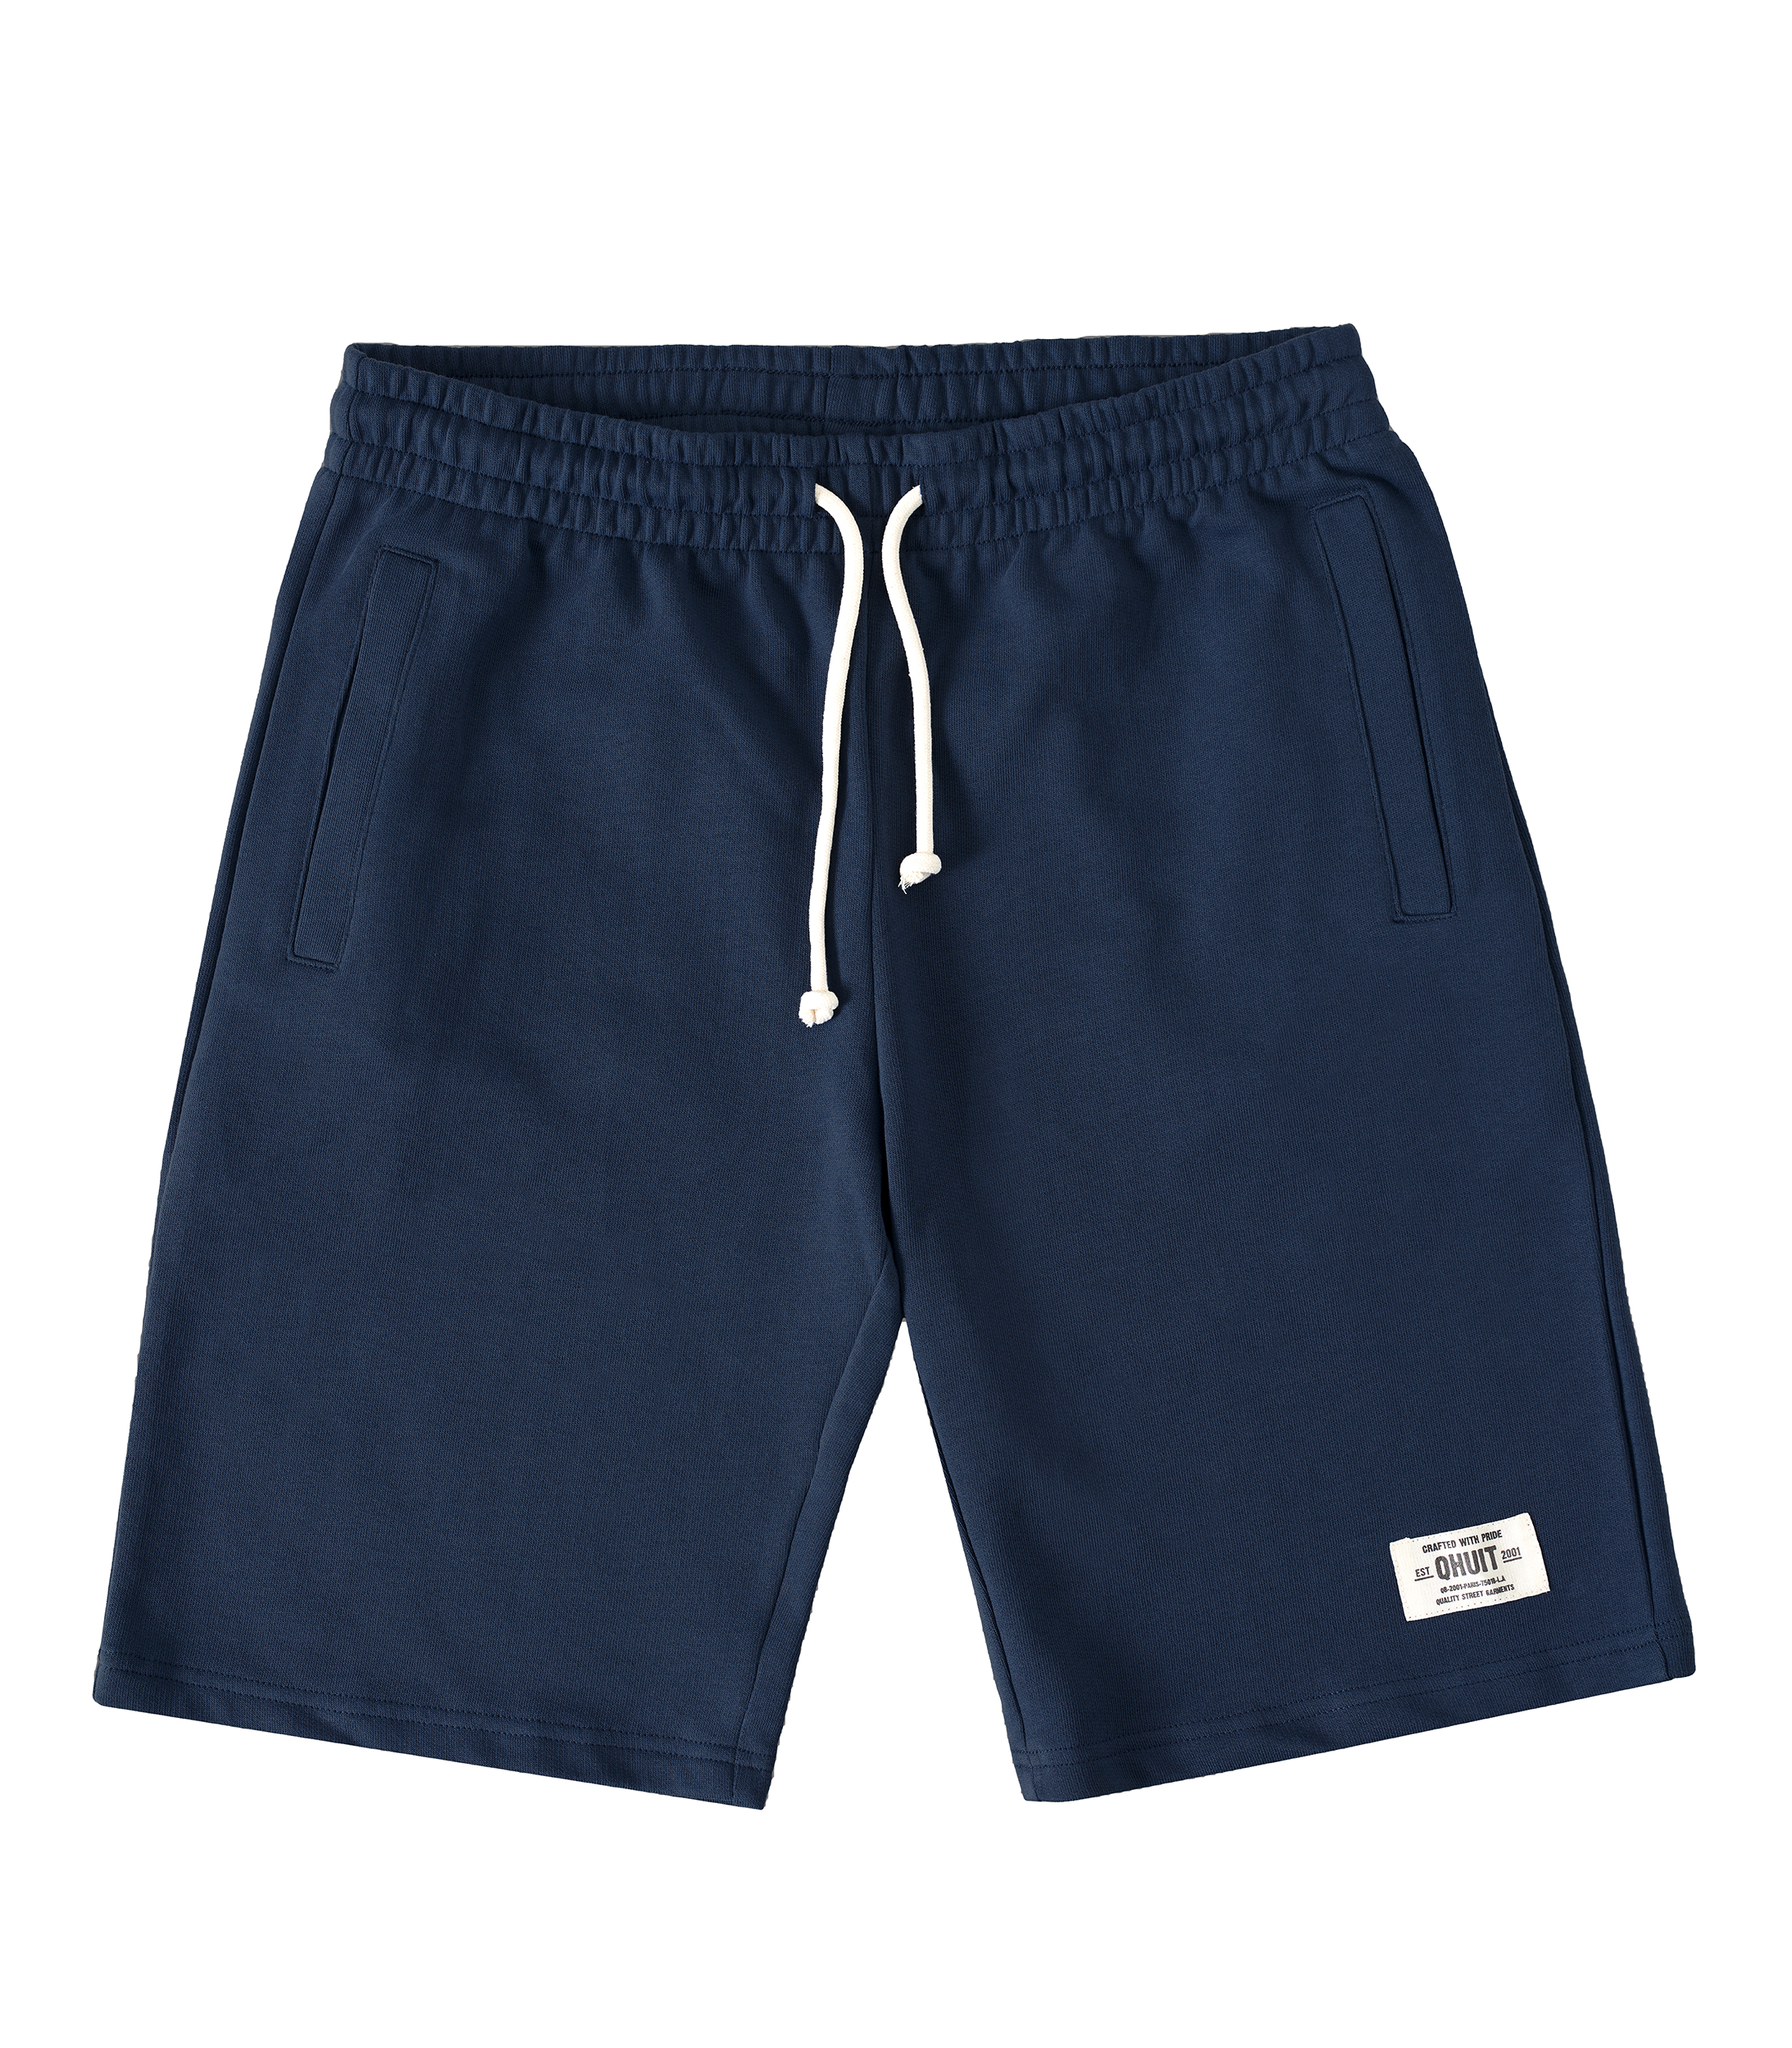 CRAFTED, short navy